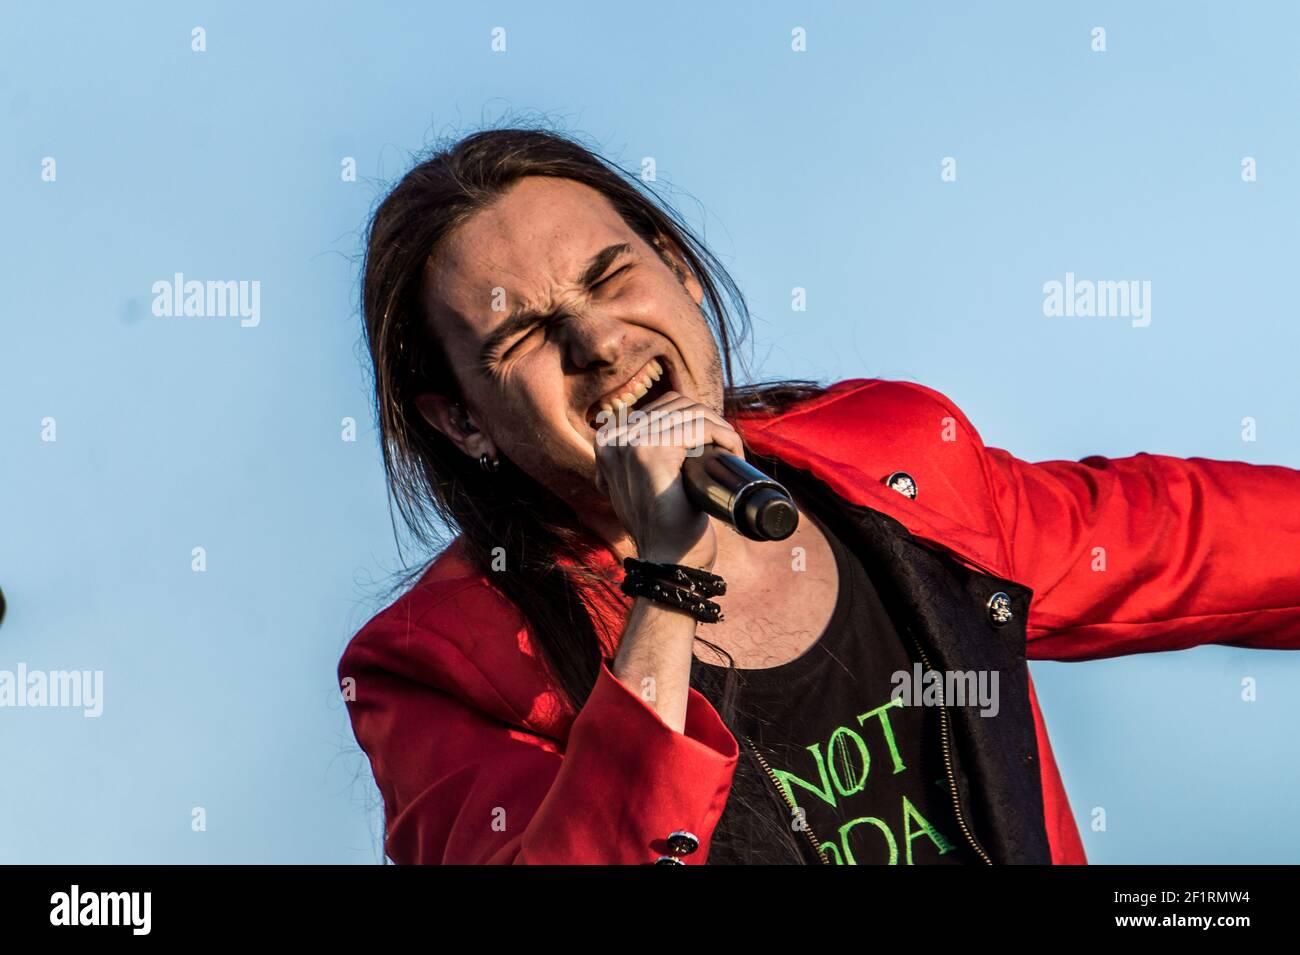 COSLADA, SPAIN - Jun 07, 2019: Cosalda, Madrid, Spain. June 7, 2019. Concert by the Rock group Debler, as the opening act for Mago de Oz in the festiv Stock Photo